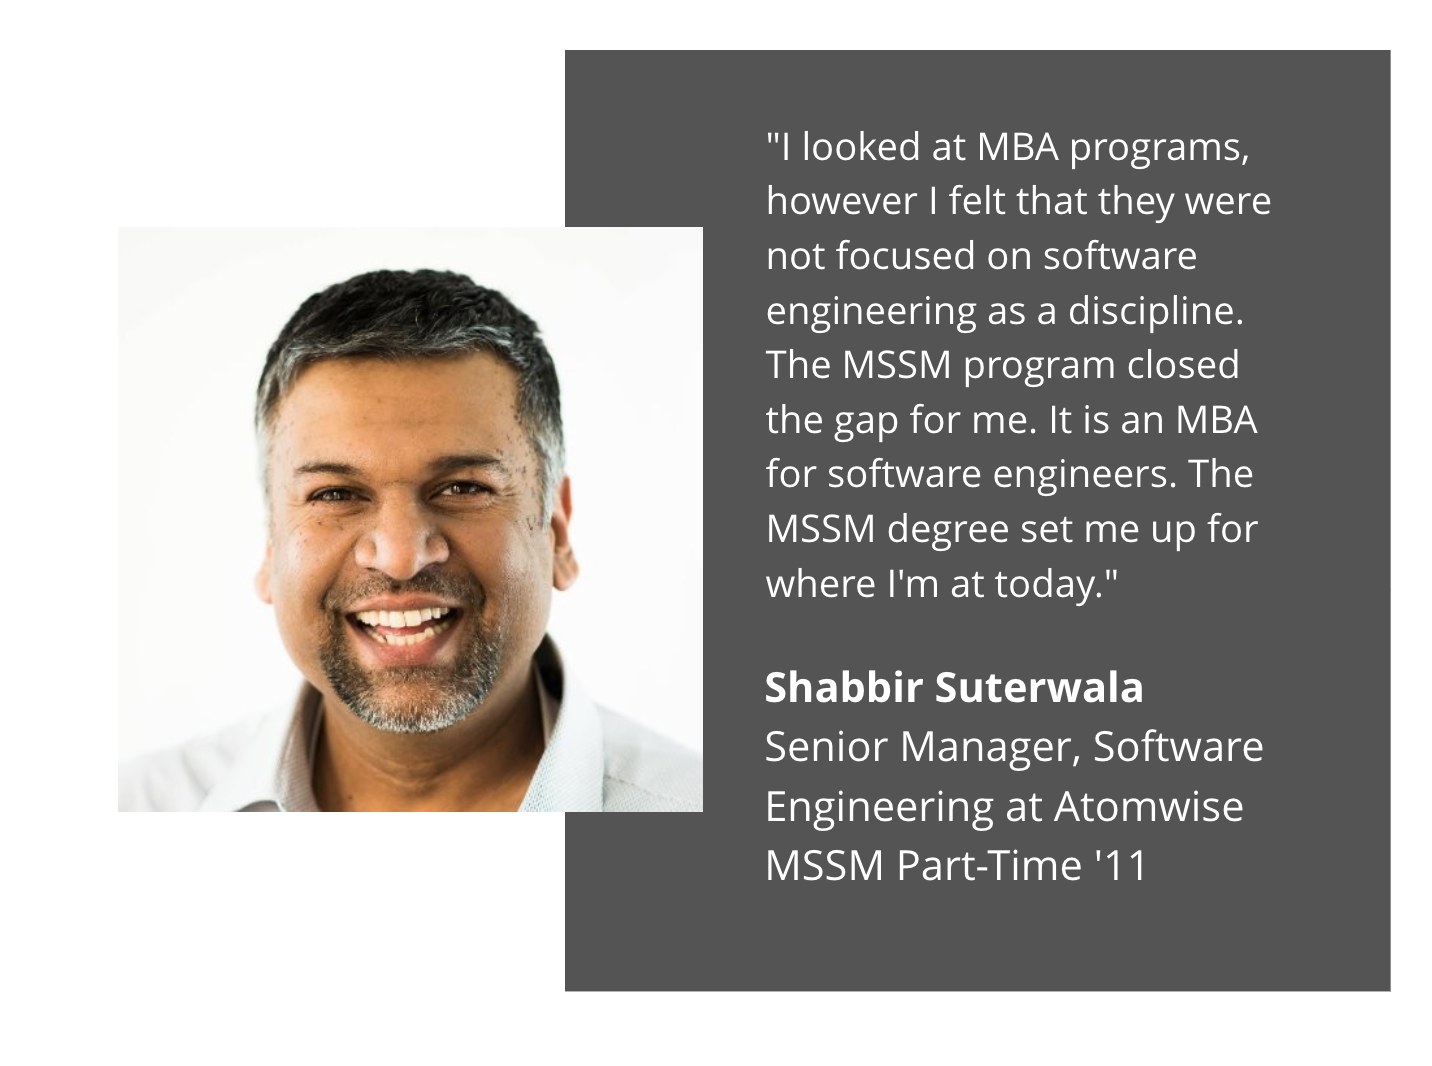 shabbir suterwala testimonial:"I looked at MBA programs, however I felt that they were not focused on software engineering as a discipline. The MSSM program closed the gap for me. It is an MBA for software engineers. The MSSM degree set me up for where I'm at today."  Shabbir Suterwala Senior Manager, Software Engineering at Atomwise MSSM Part Time '11 